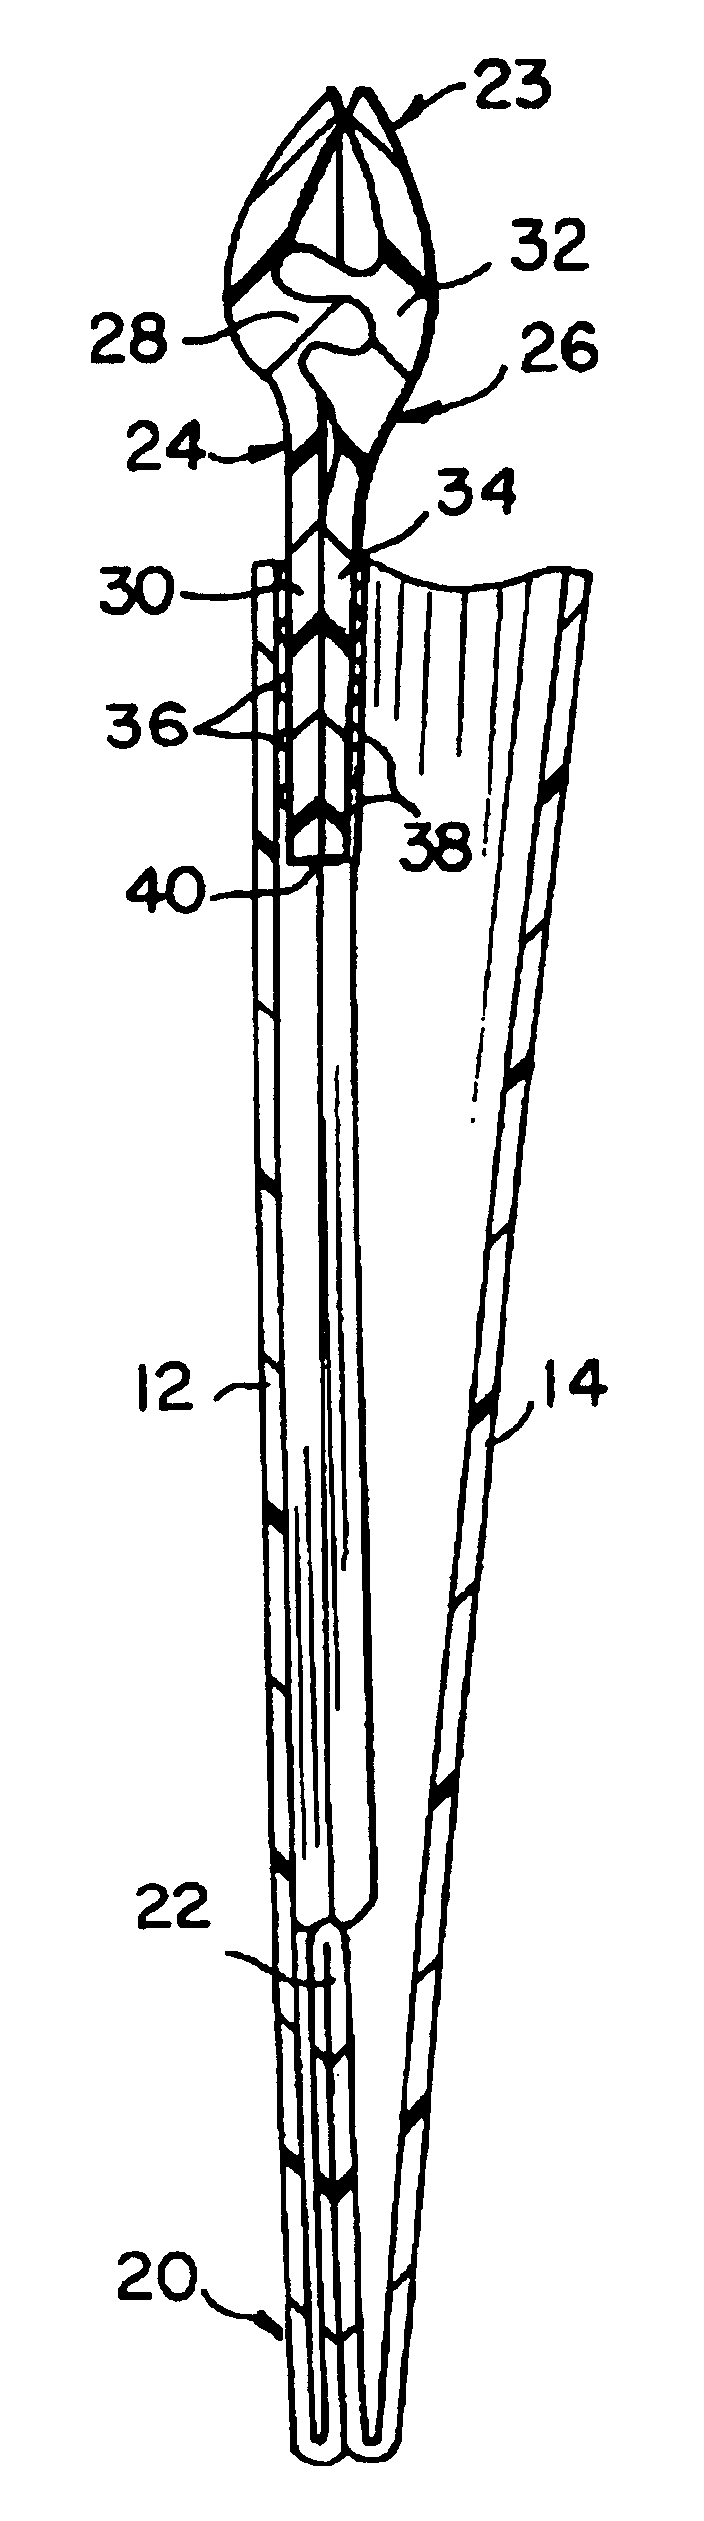 Methods of making and filling a fill-through-the-top package